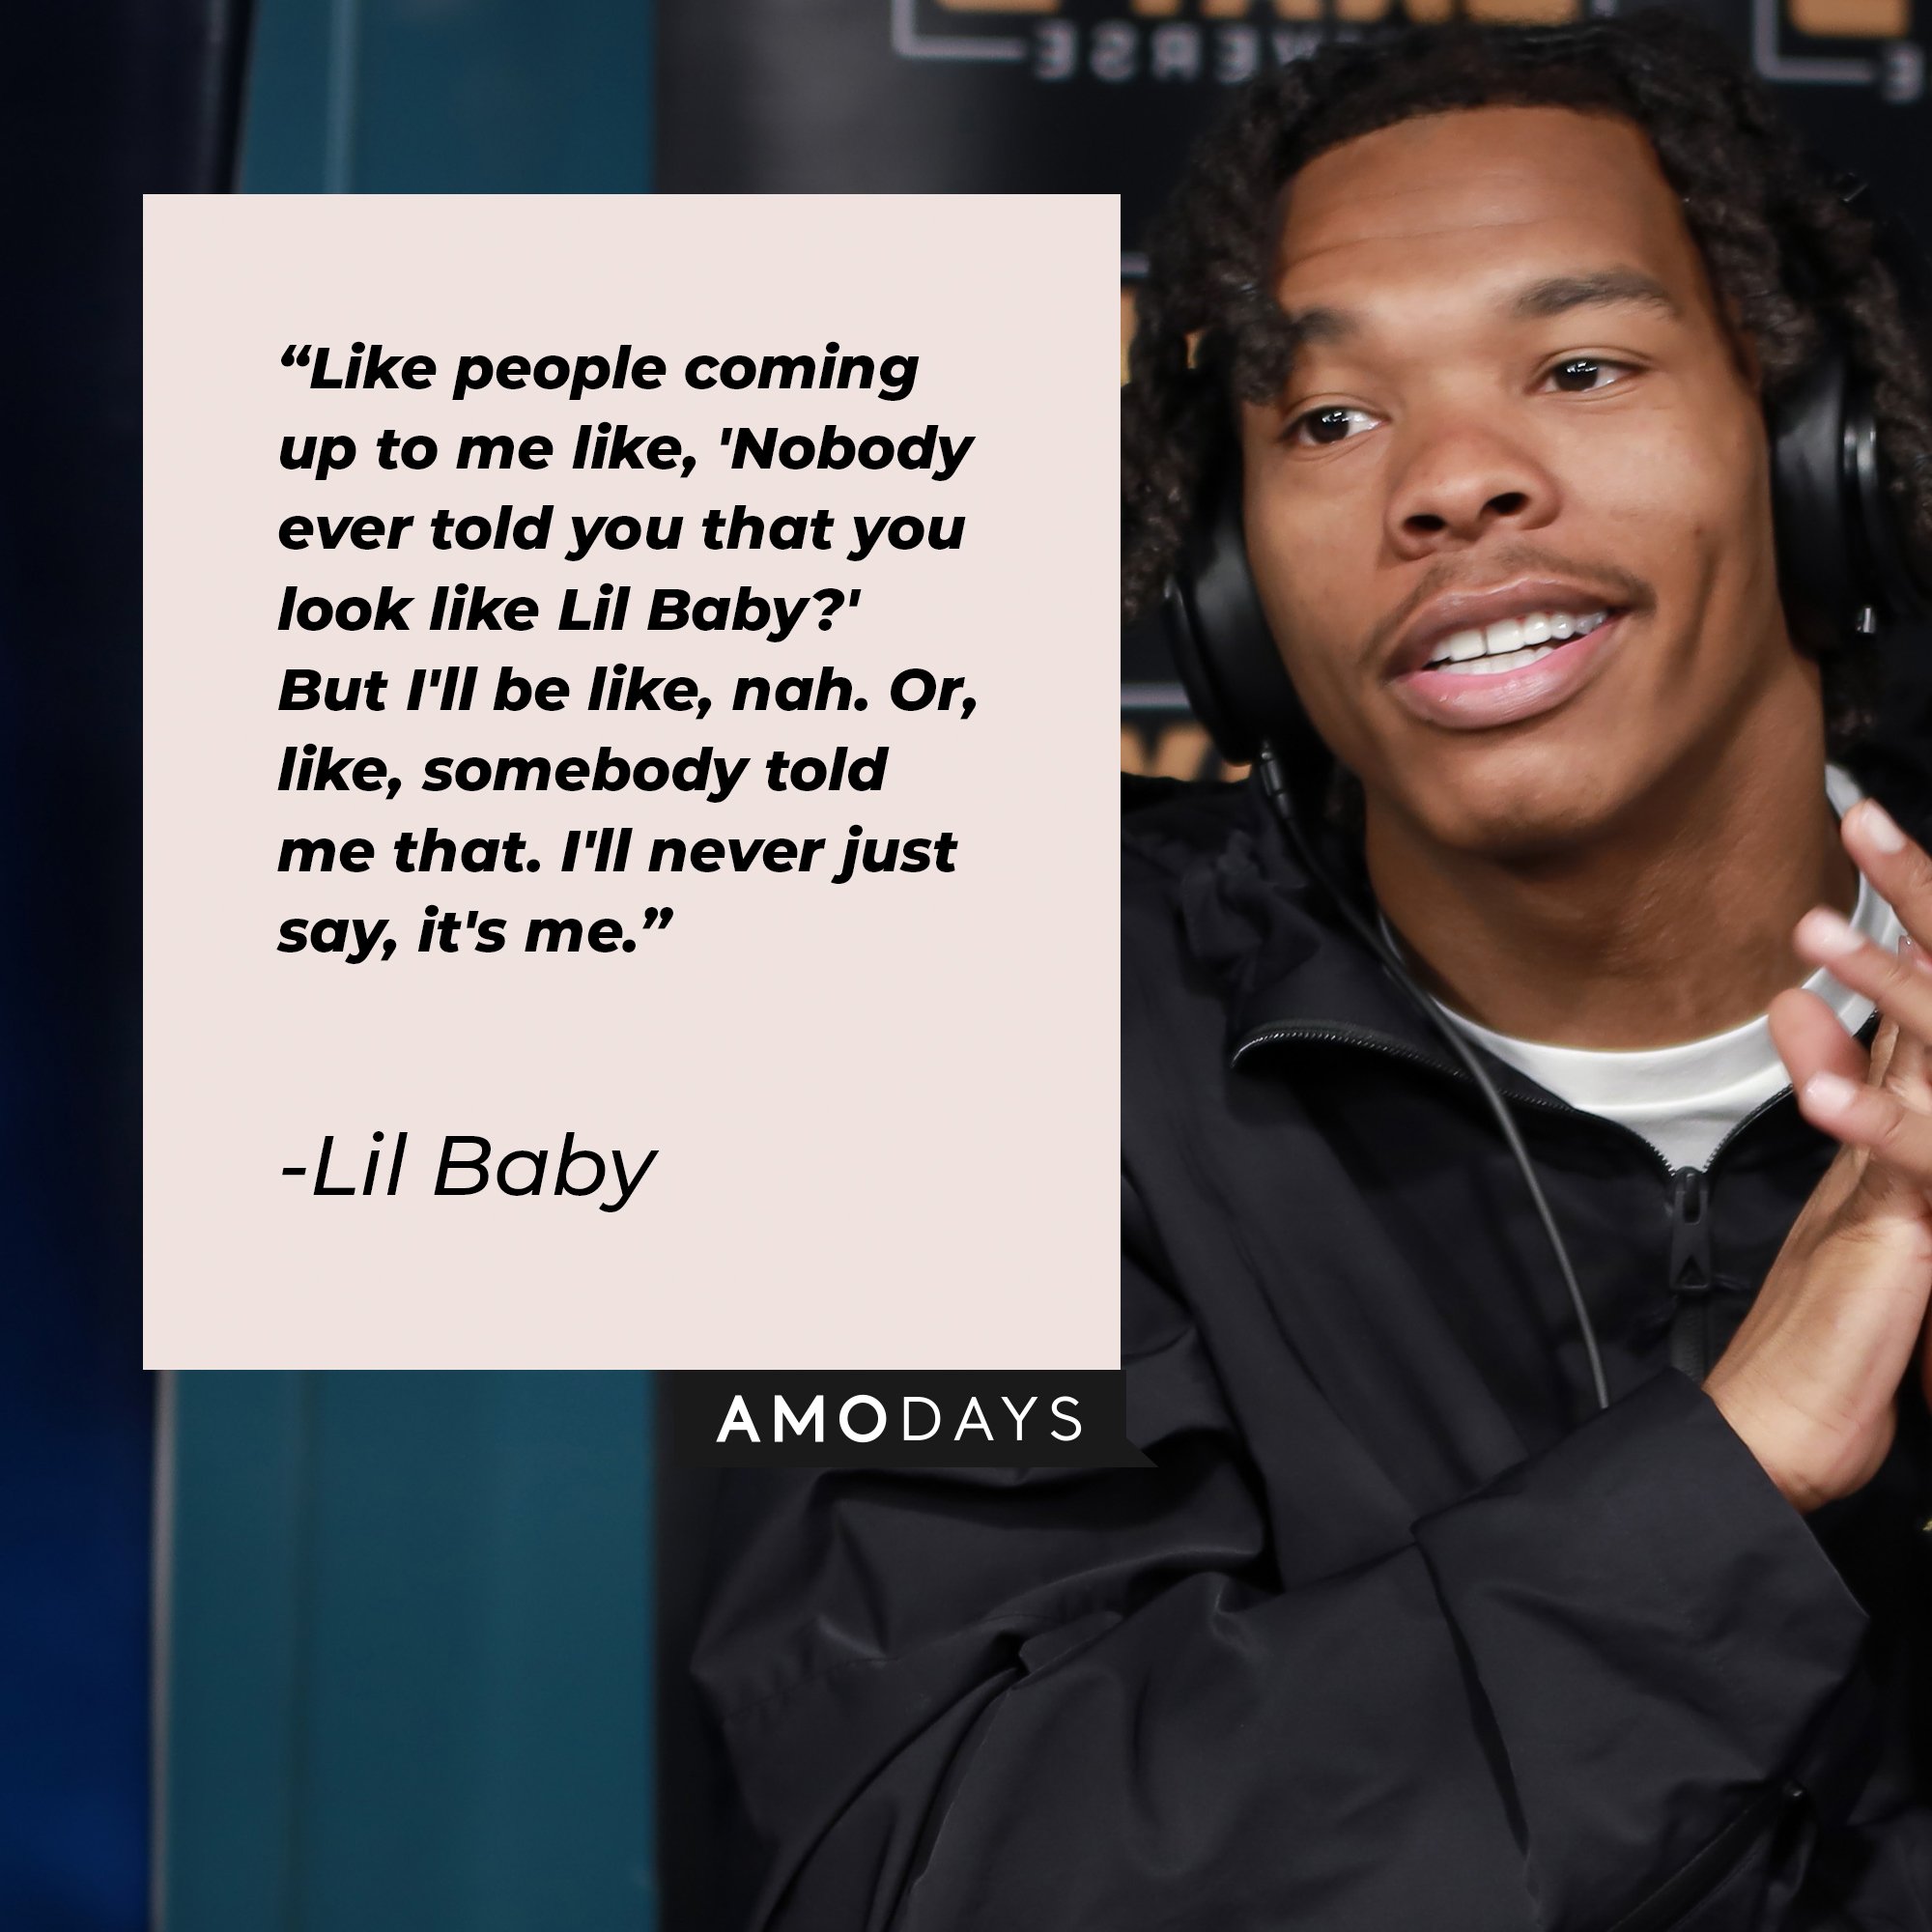 Lil Baby’s quote: “Like people coming up to me like, 'Nobody ever told you that you look like Lil Baby?' But I'll be like, nah. Or, like, somebody told me that. I'll never just say, it's me." | Image: AmoDays